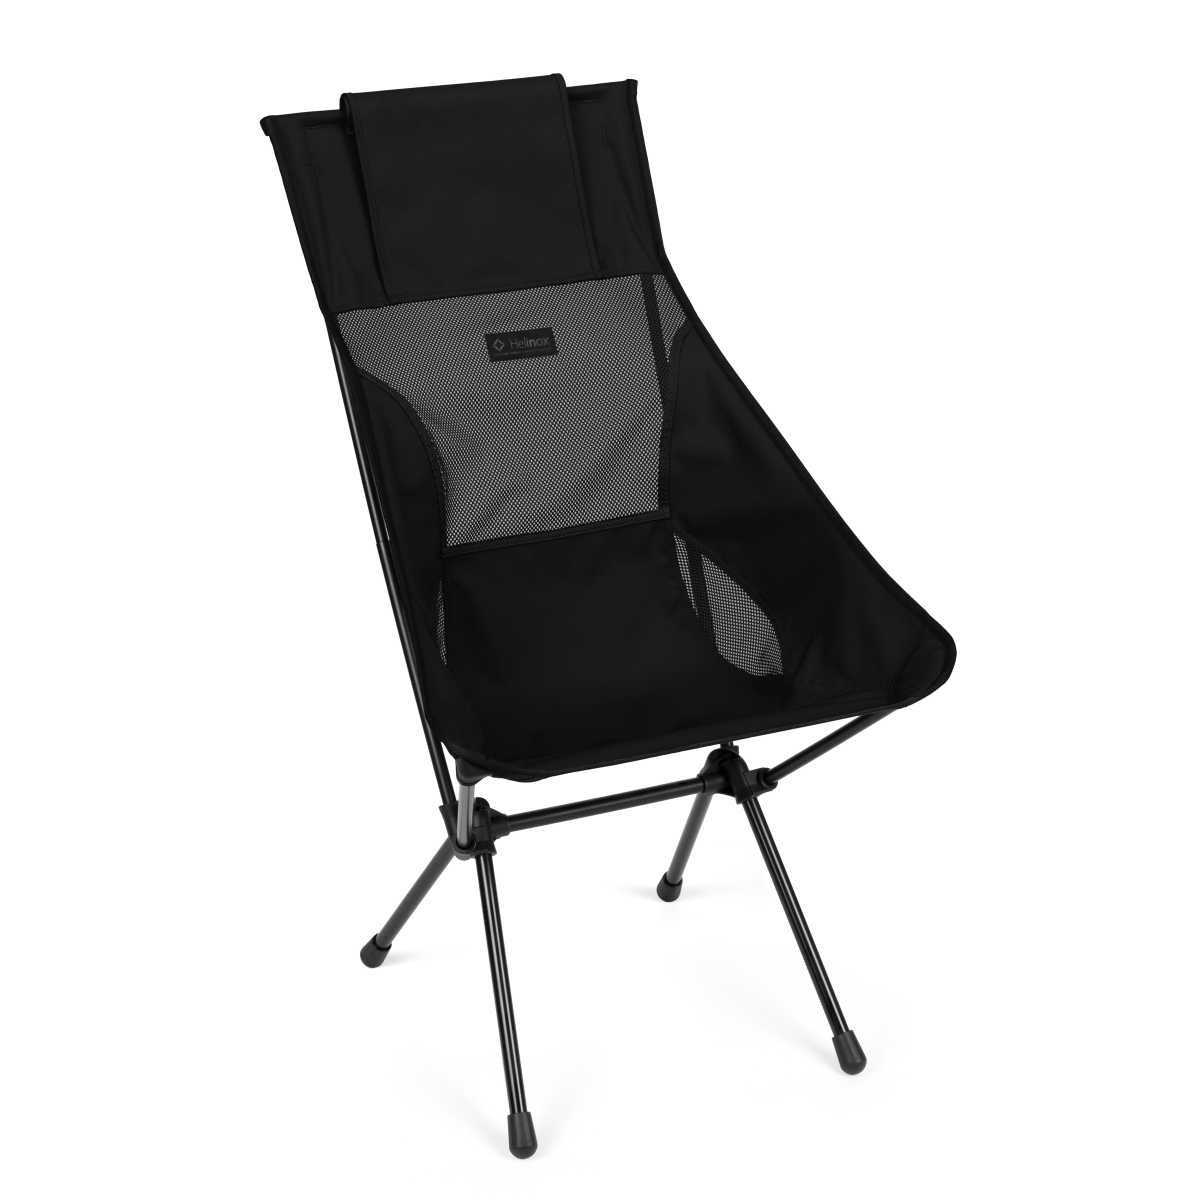 HELINOX Sunset Chair Blackout Edition Campingstuhl 11134R2